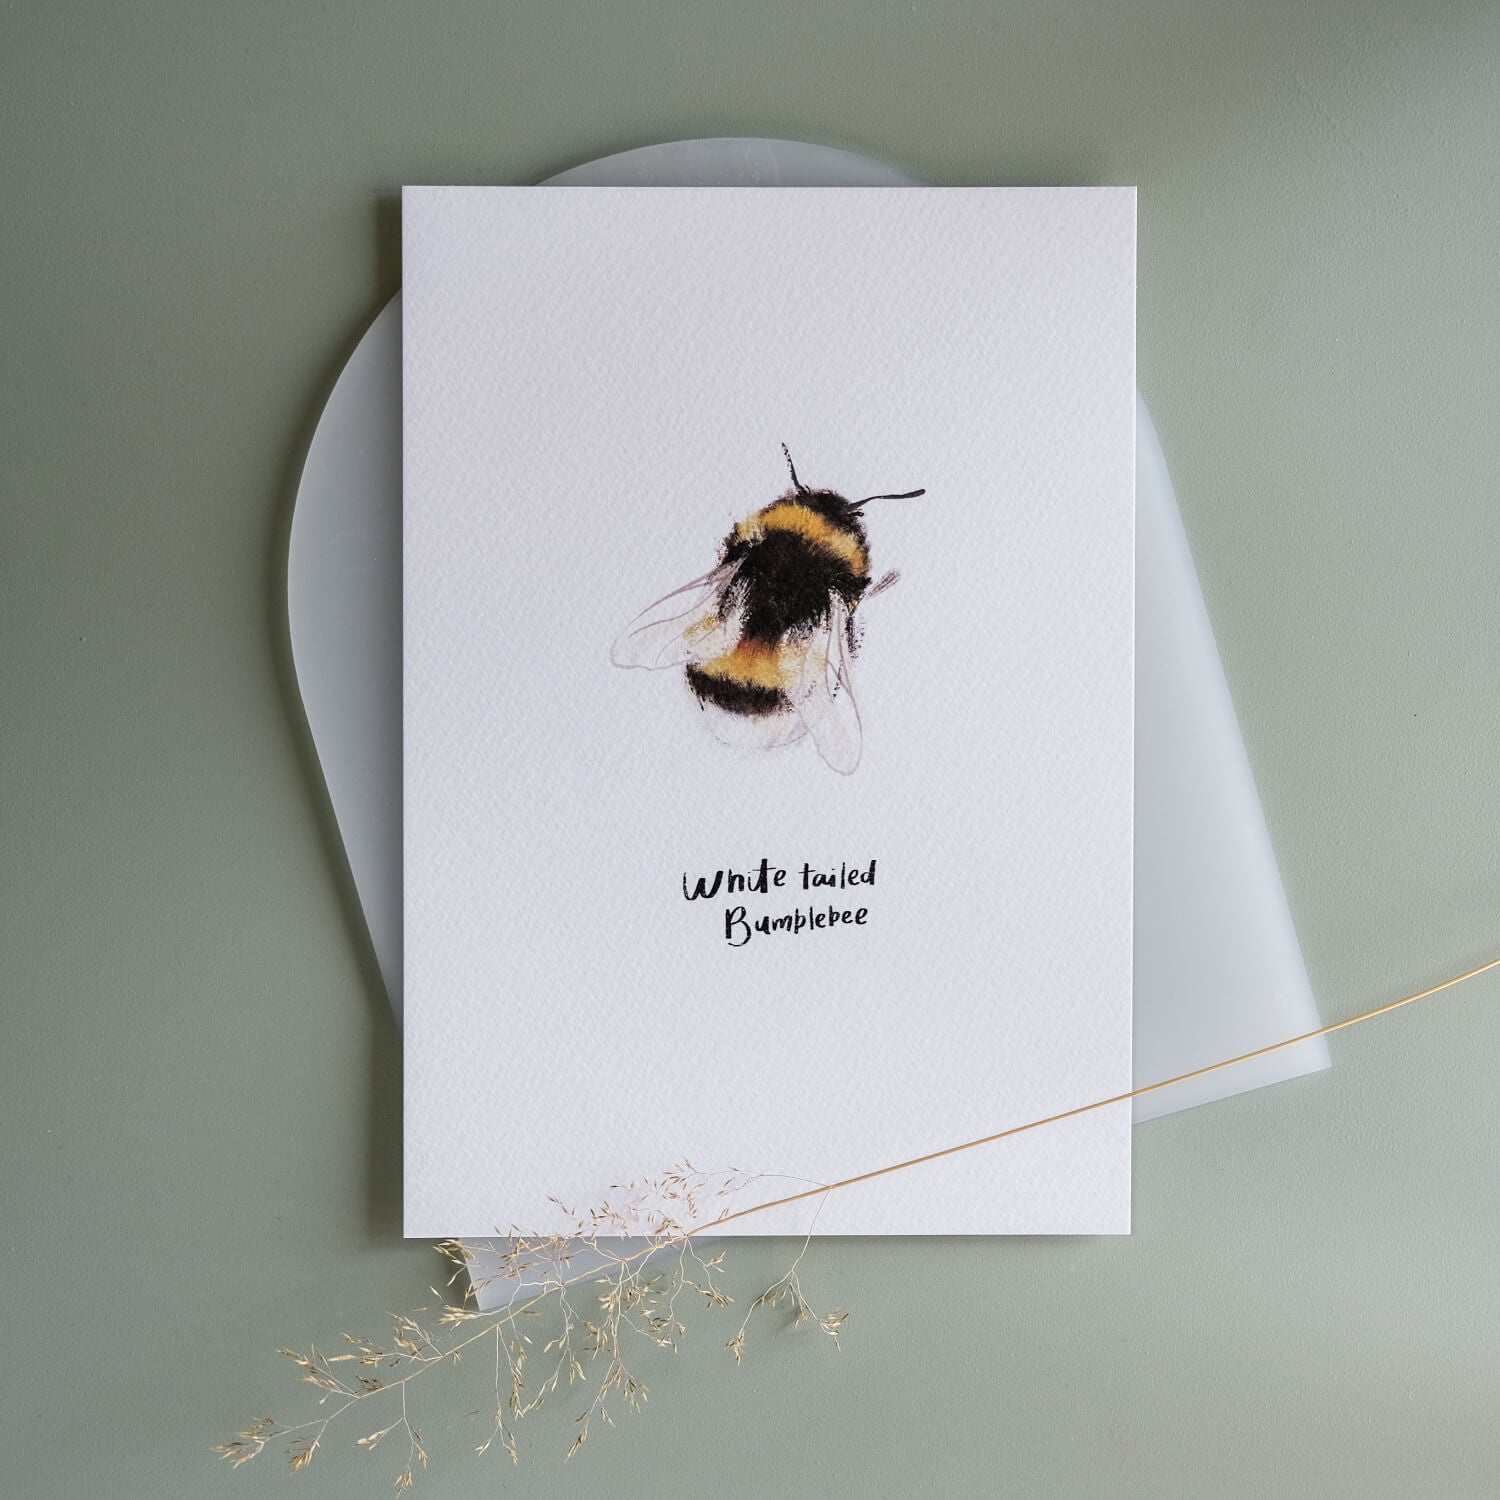 White Tailed Bumble Bee Print - The Moonlit Press